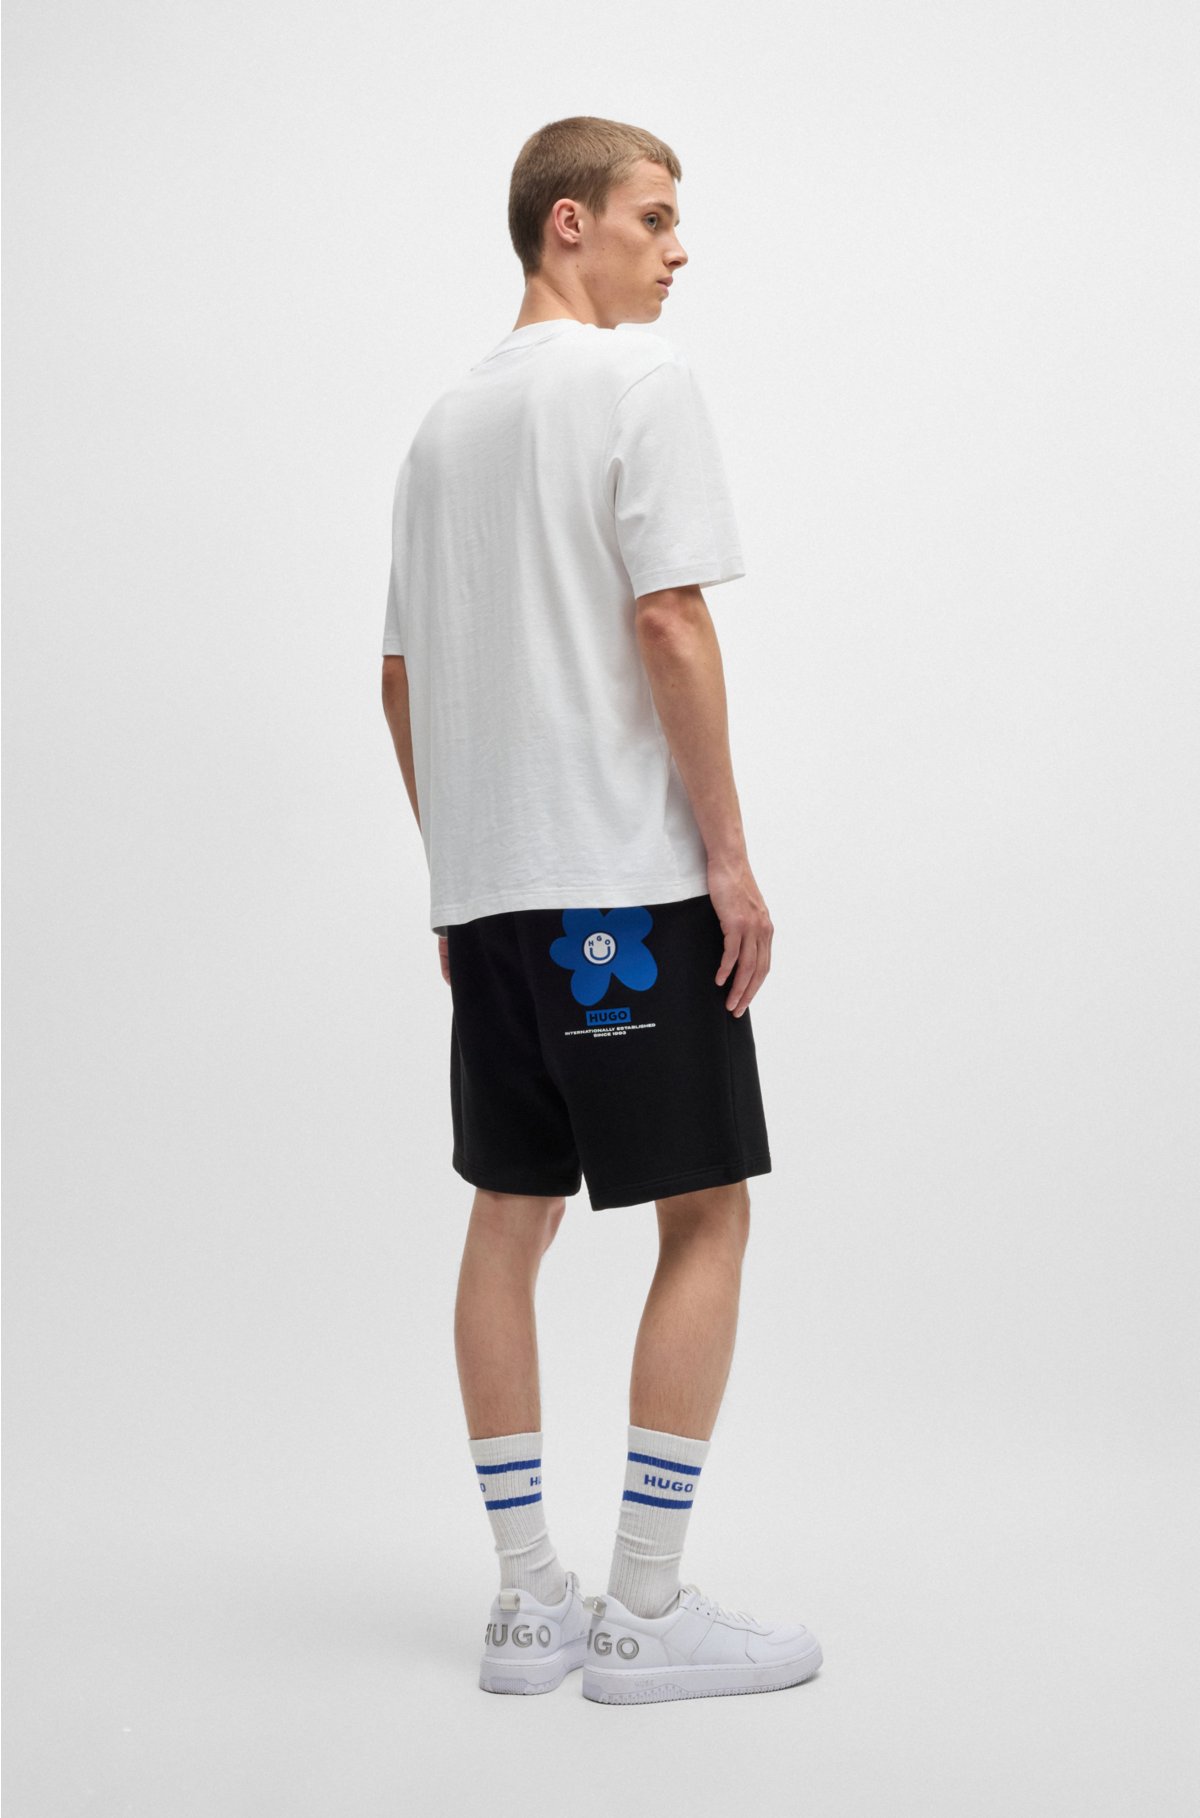 Cotton-jersey T-shirt with blue logo patch, White